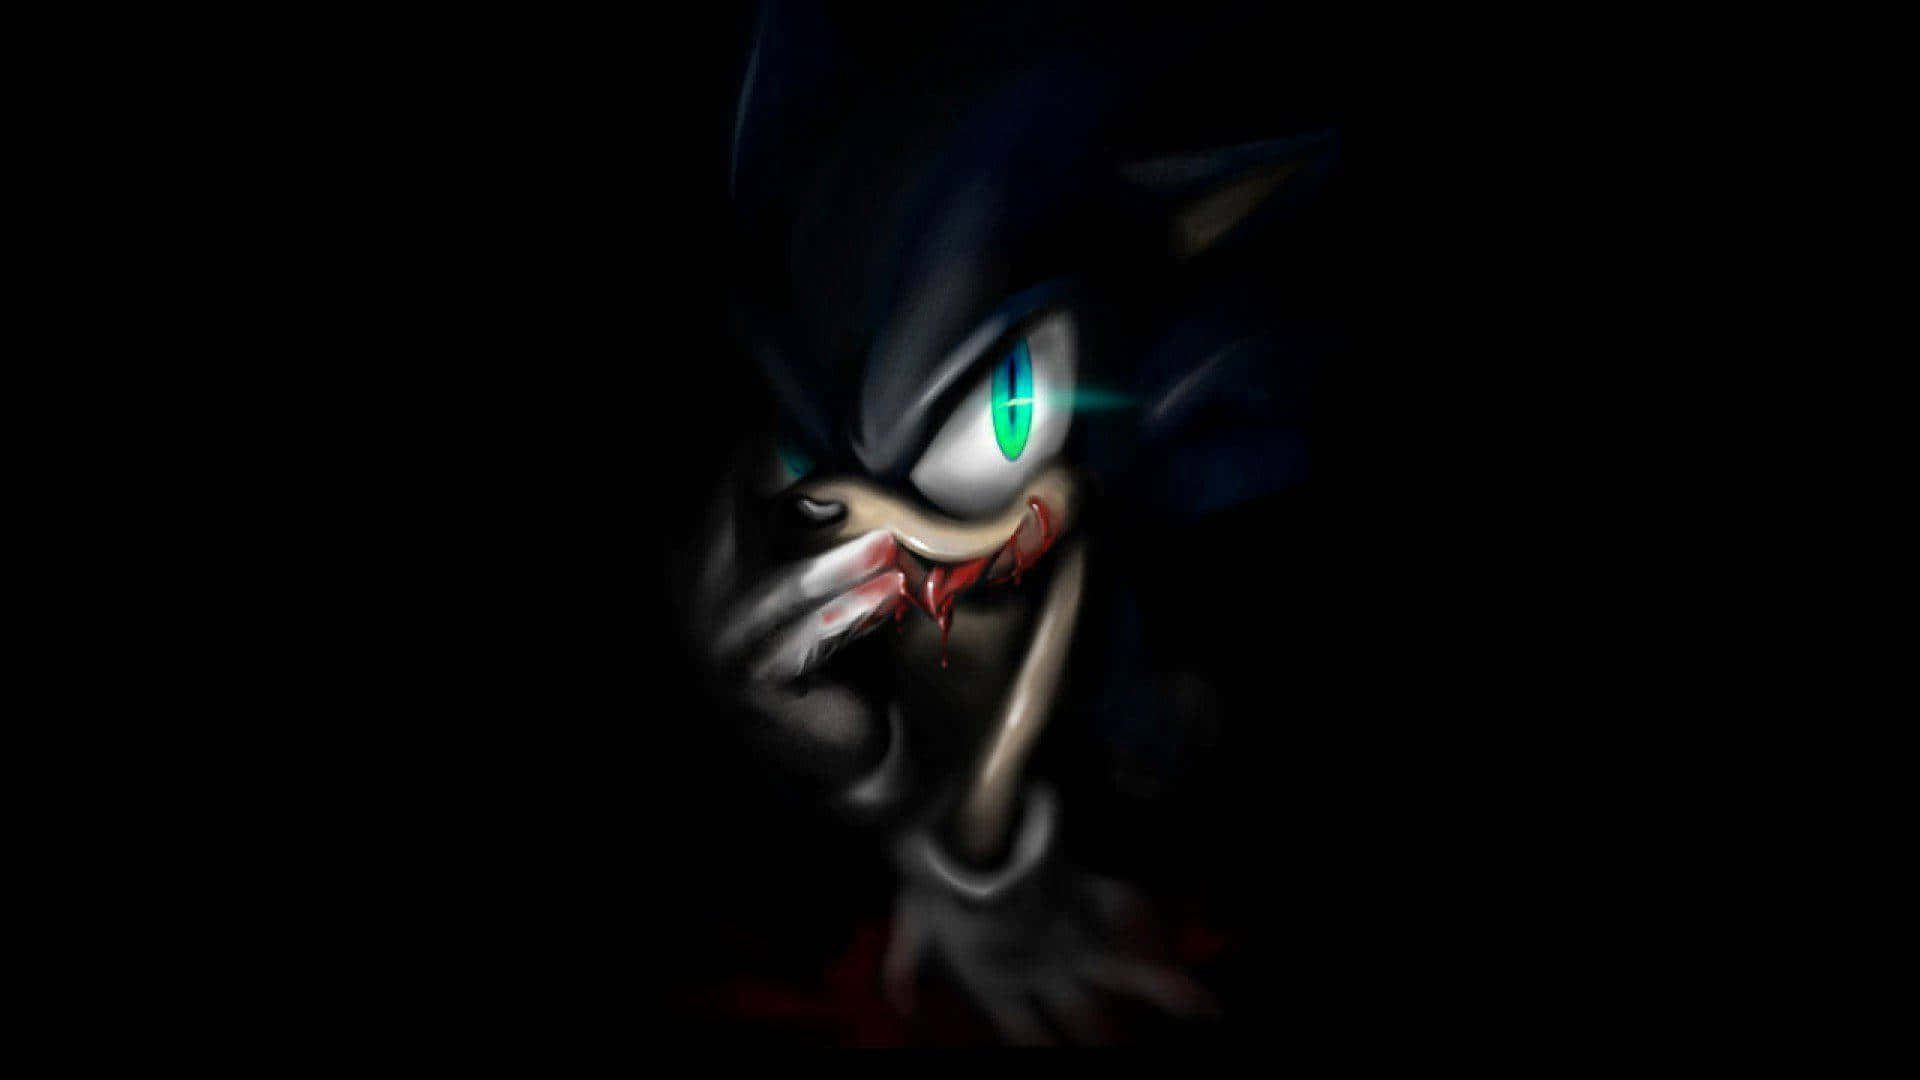 100+] Sonic And Shadow Wallpapers